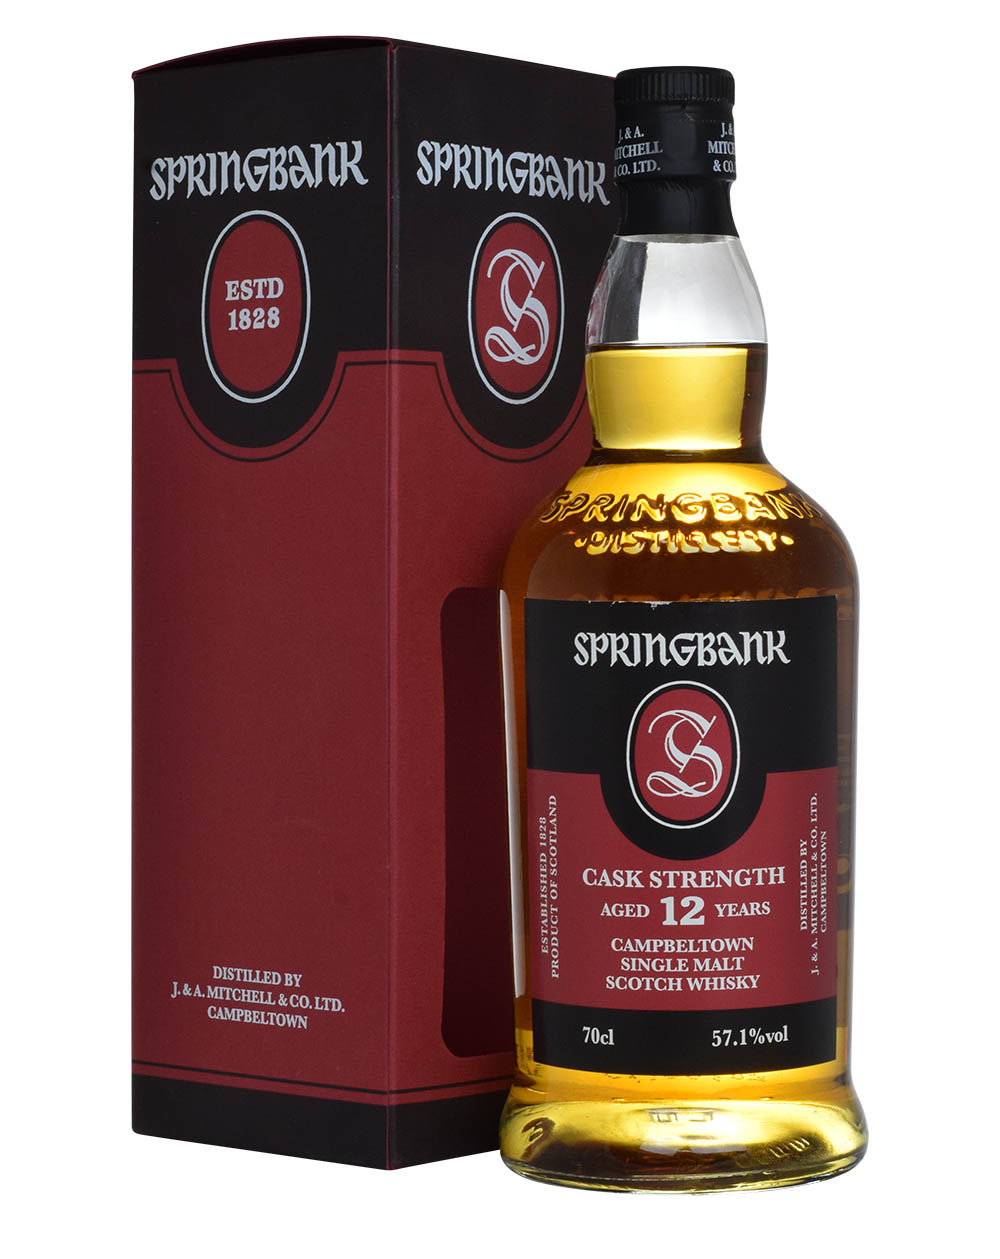 Springbank 12 Years Old Cask Strength Batch 19 Box Musthave Malts MHM